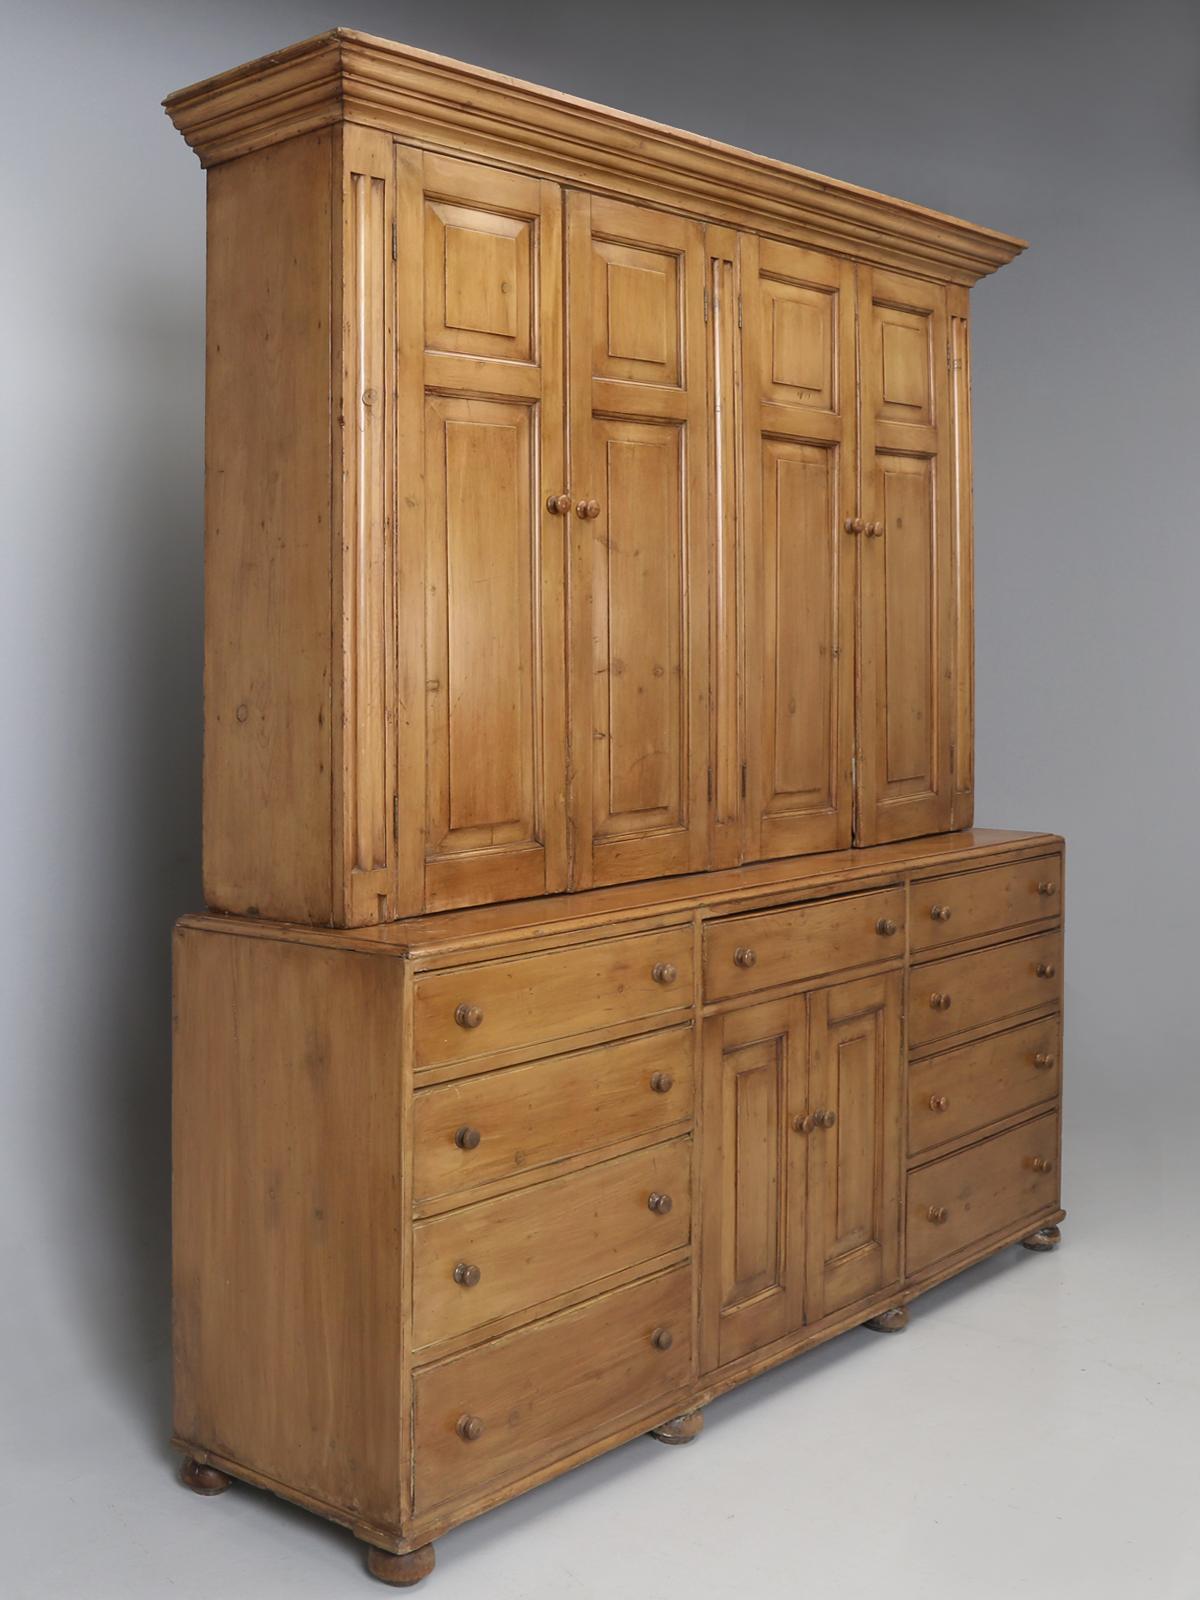 When I think about the last time, we could offer an antique English scrubbed pine housekeepers’ cupboard it’s more than 15 years ago. These beautiful scrubbed English pine cabinets or pine cupboards are about as common as hens’ teeth. This is